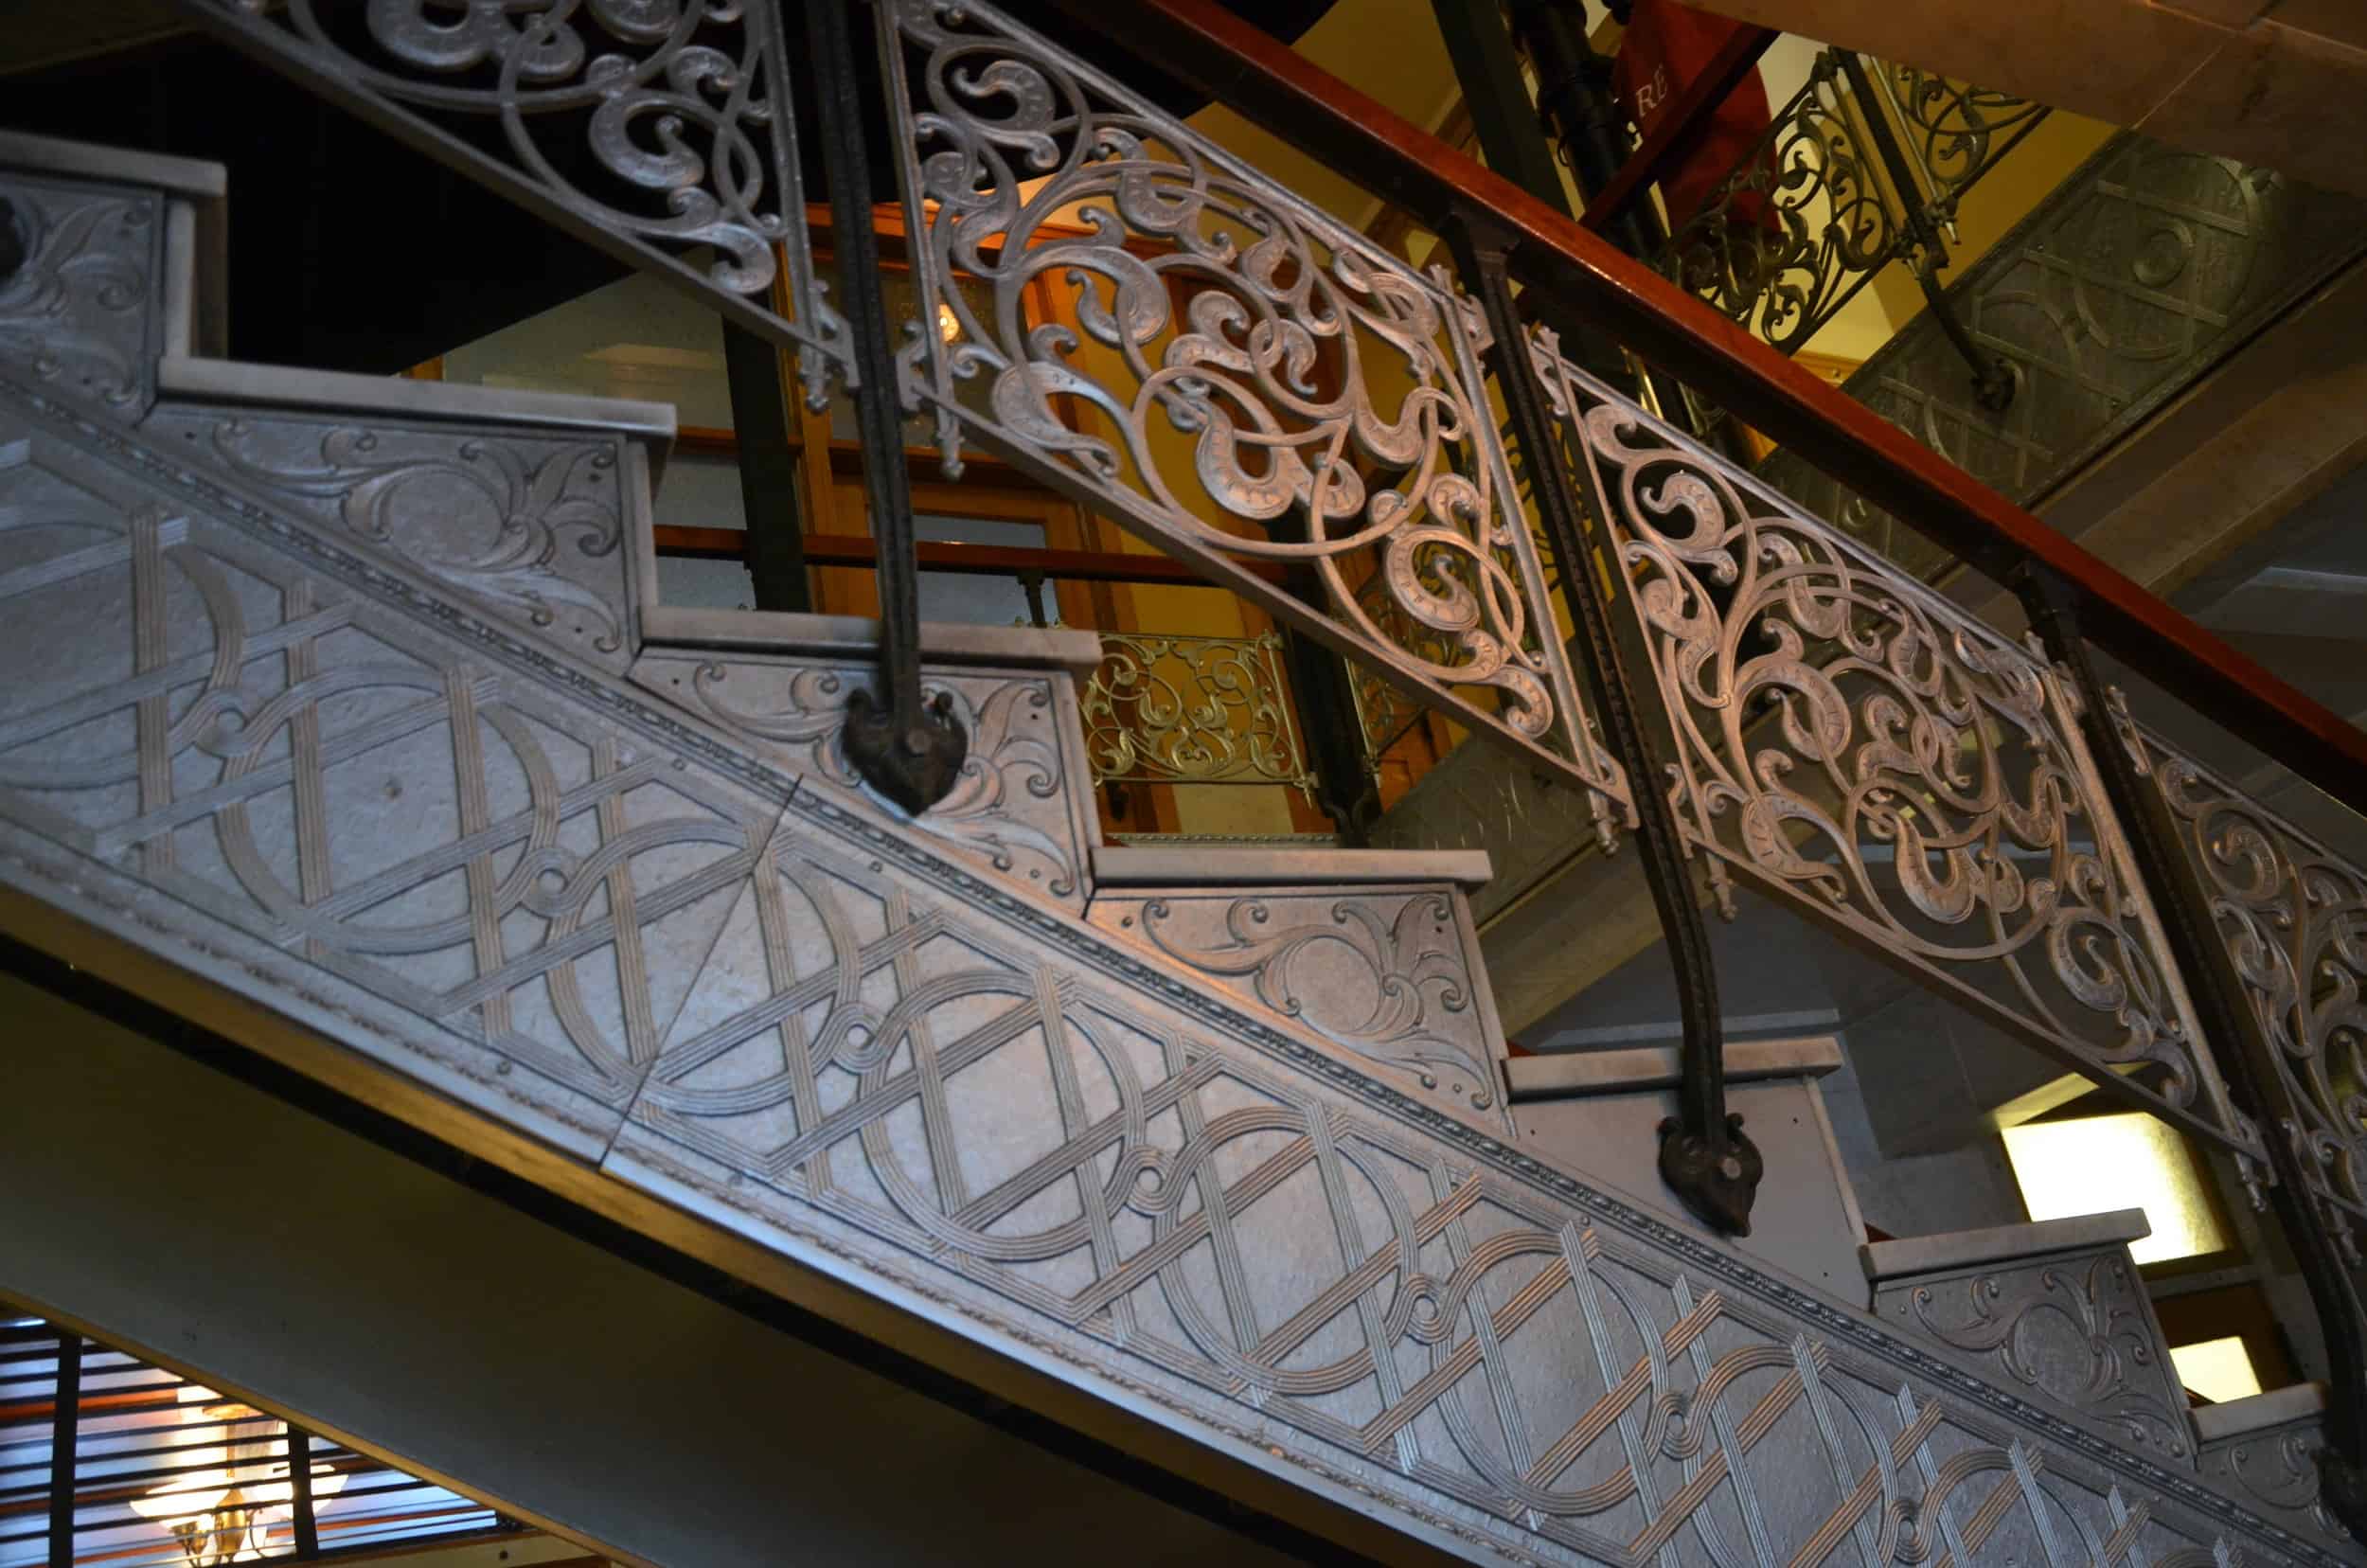 Cast aluminum staircase of the Monadnock Building along Dearborn Street in Chicago, Illinois